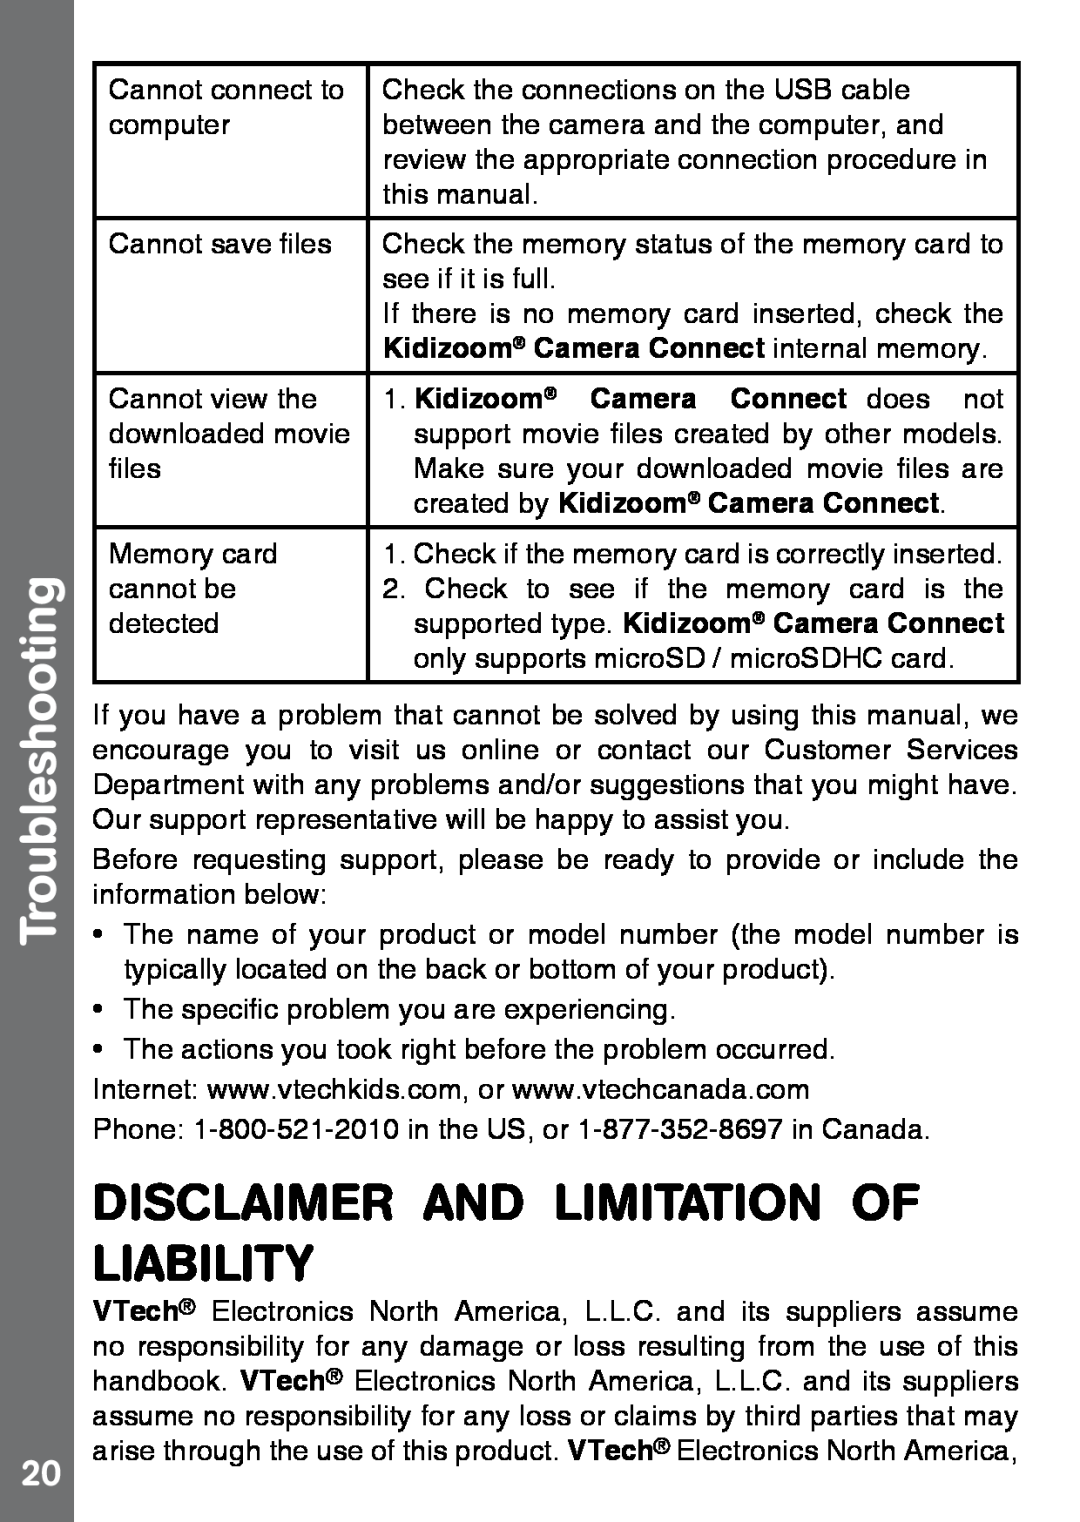 VTech 91-002843-000 Disclaimer And Limitation Of Liability, Kidizoom Camera Connect internal memory, Troubleshooting 